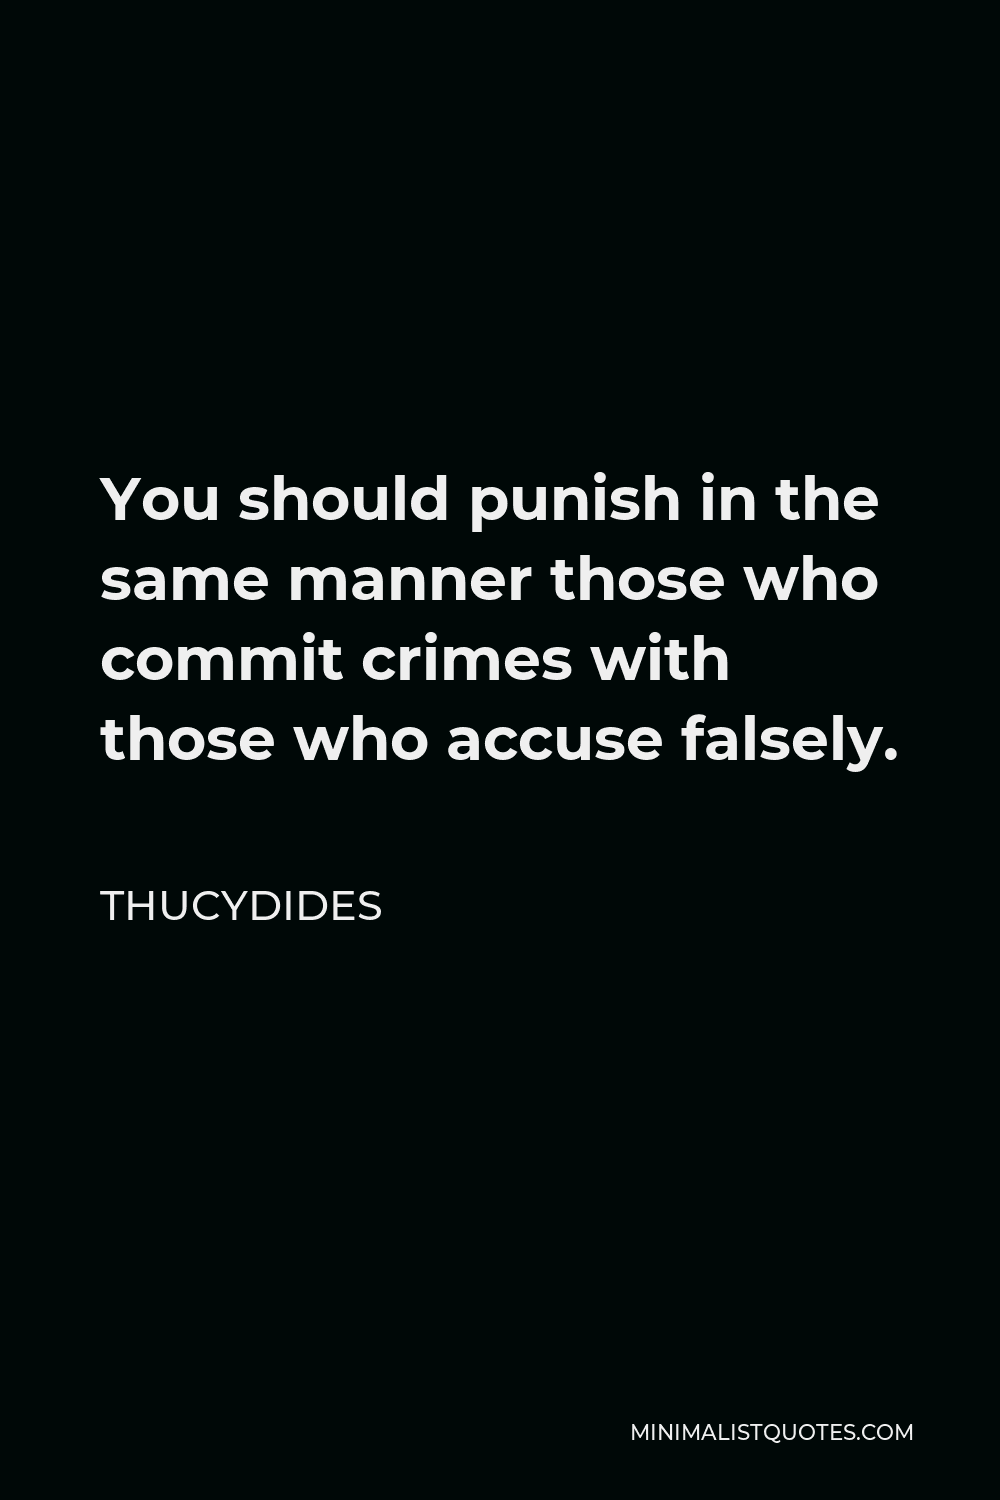 Thucydides Quote - You should punish in the same manner those who commit crimes with those who accuse falsely.